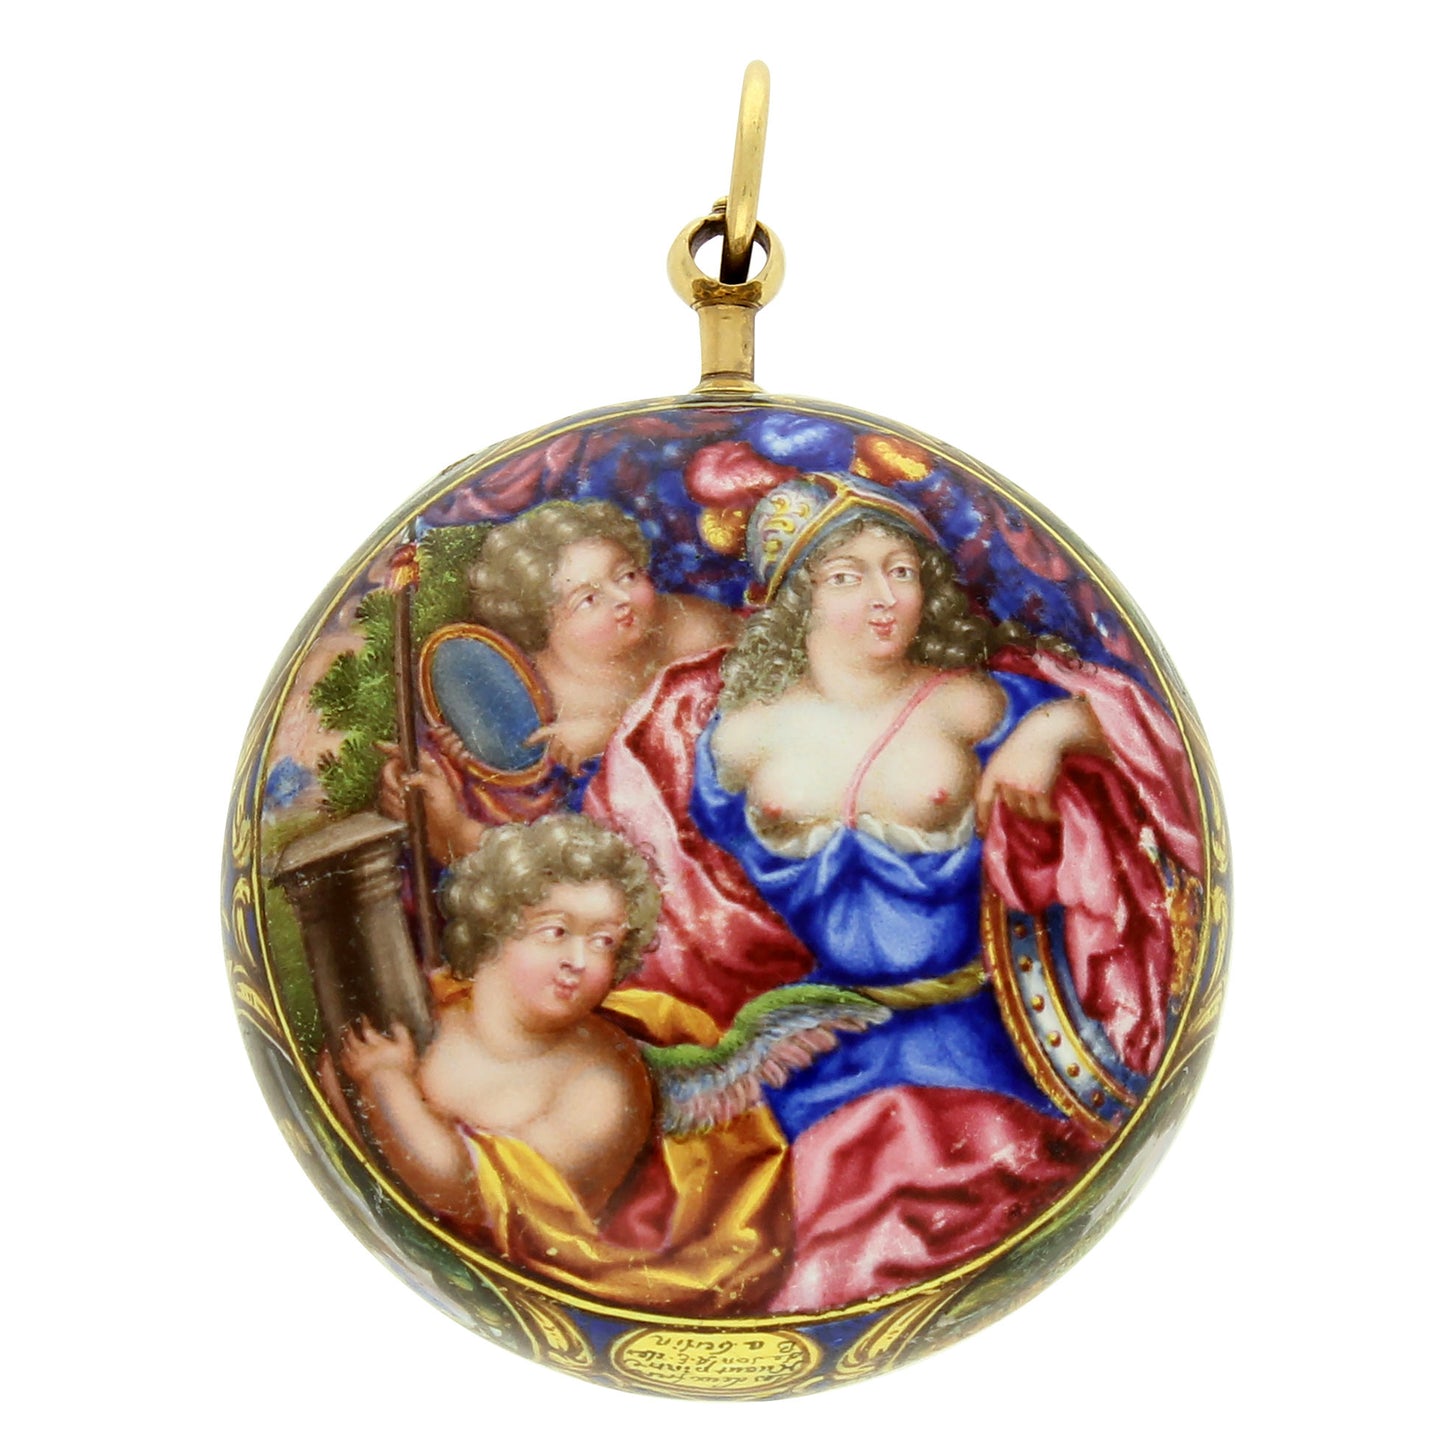 18ct yellow gold and enamel verge watch. Circa 1660